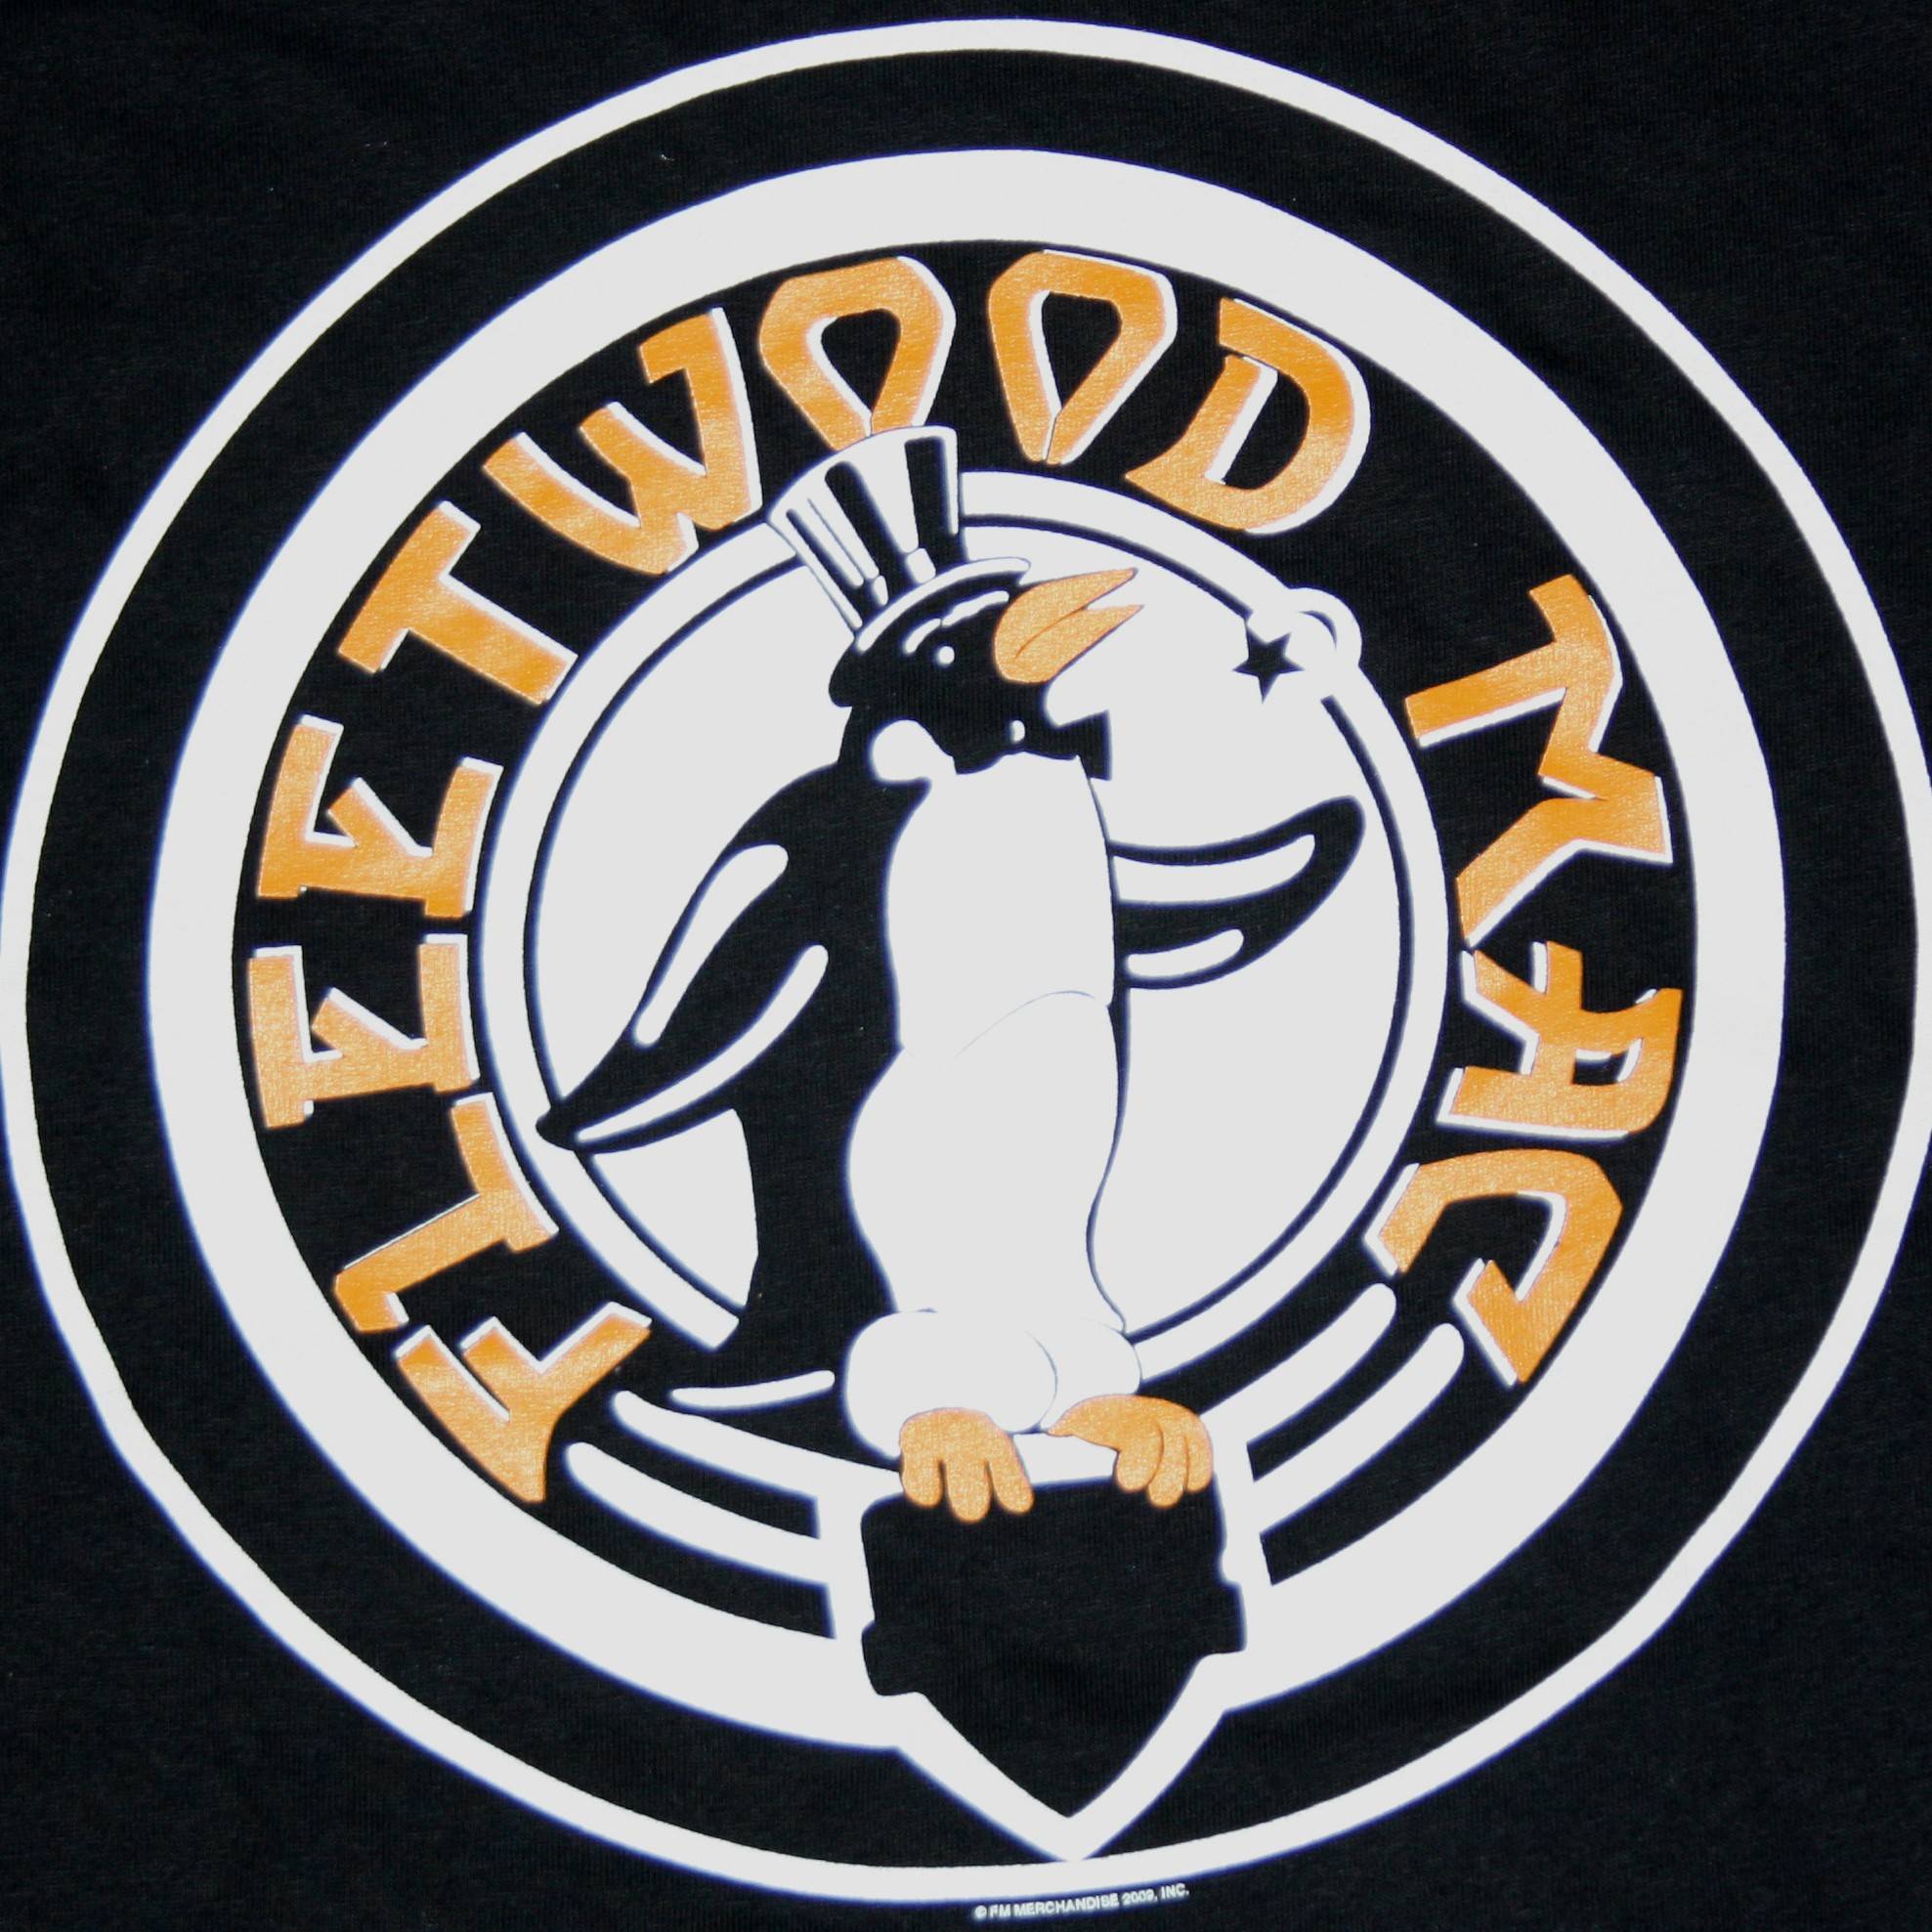 Fleetwood Mac Logo - New r/FleetwoodMac logo, based it off of this logo from one of their ...